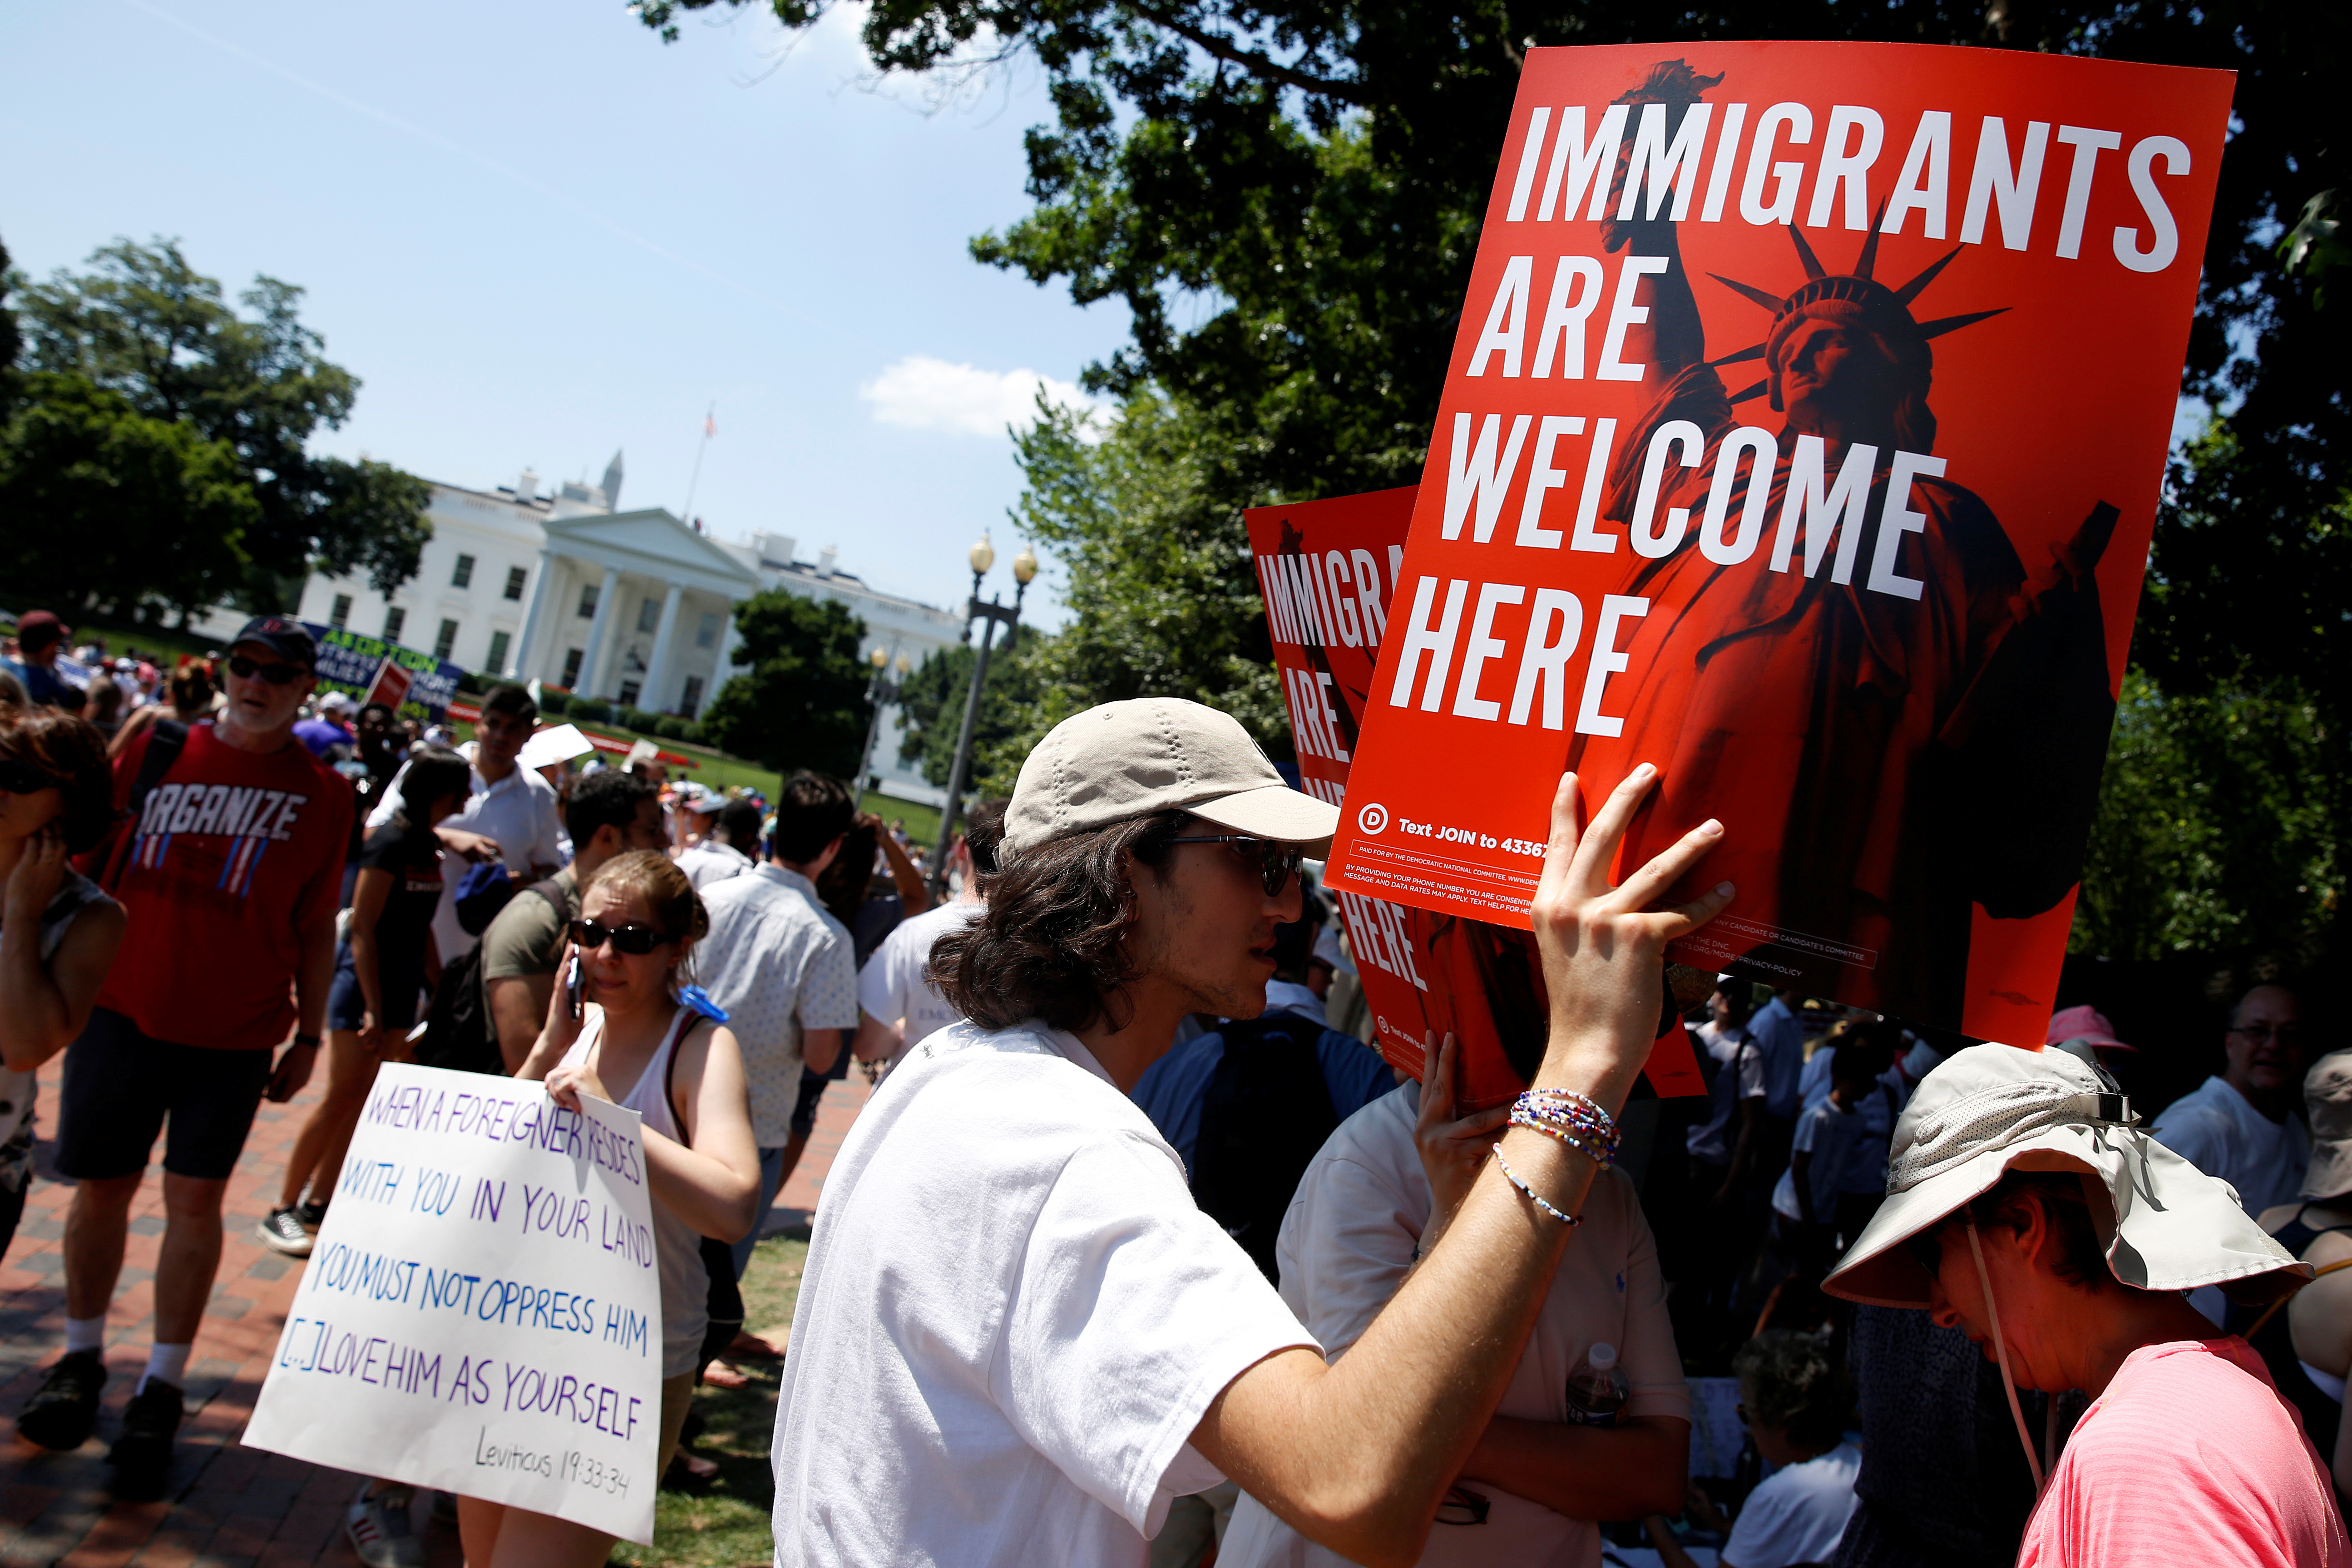 Immigration activists hold signs during a rally to protest against the Trump Administration's immigration policy, outside the White House in Washington, U.S., June 30, 2018. REUTERS/Joshua Roberts